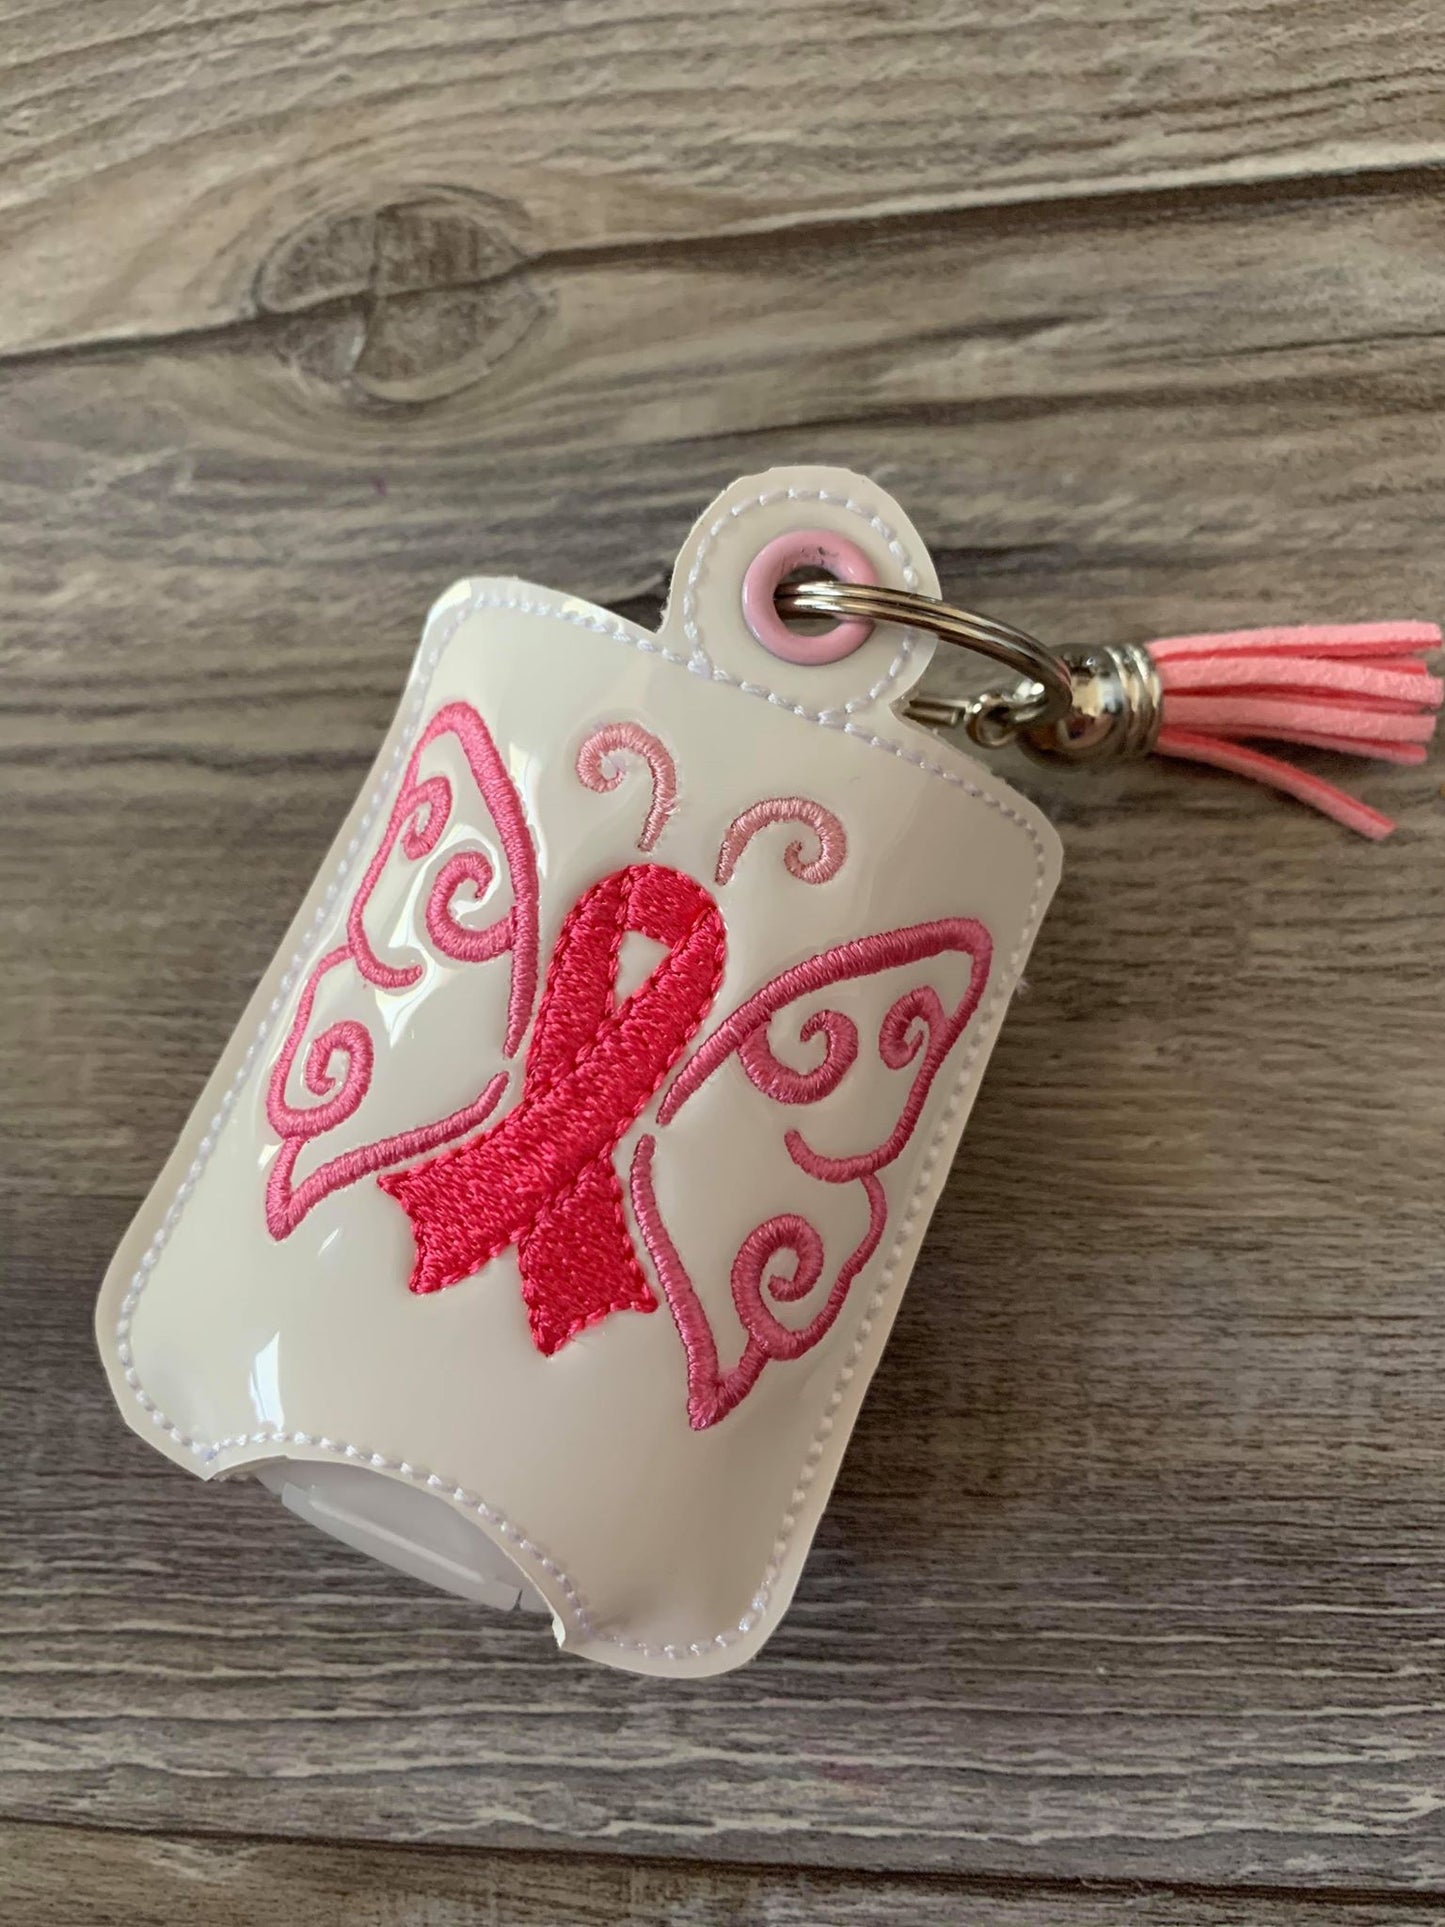 Awareness Butterfly Sanitizer Holders - DIGITAL Embroidery DESIGN